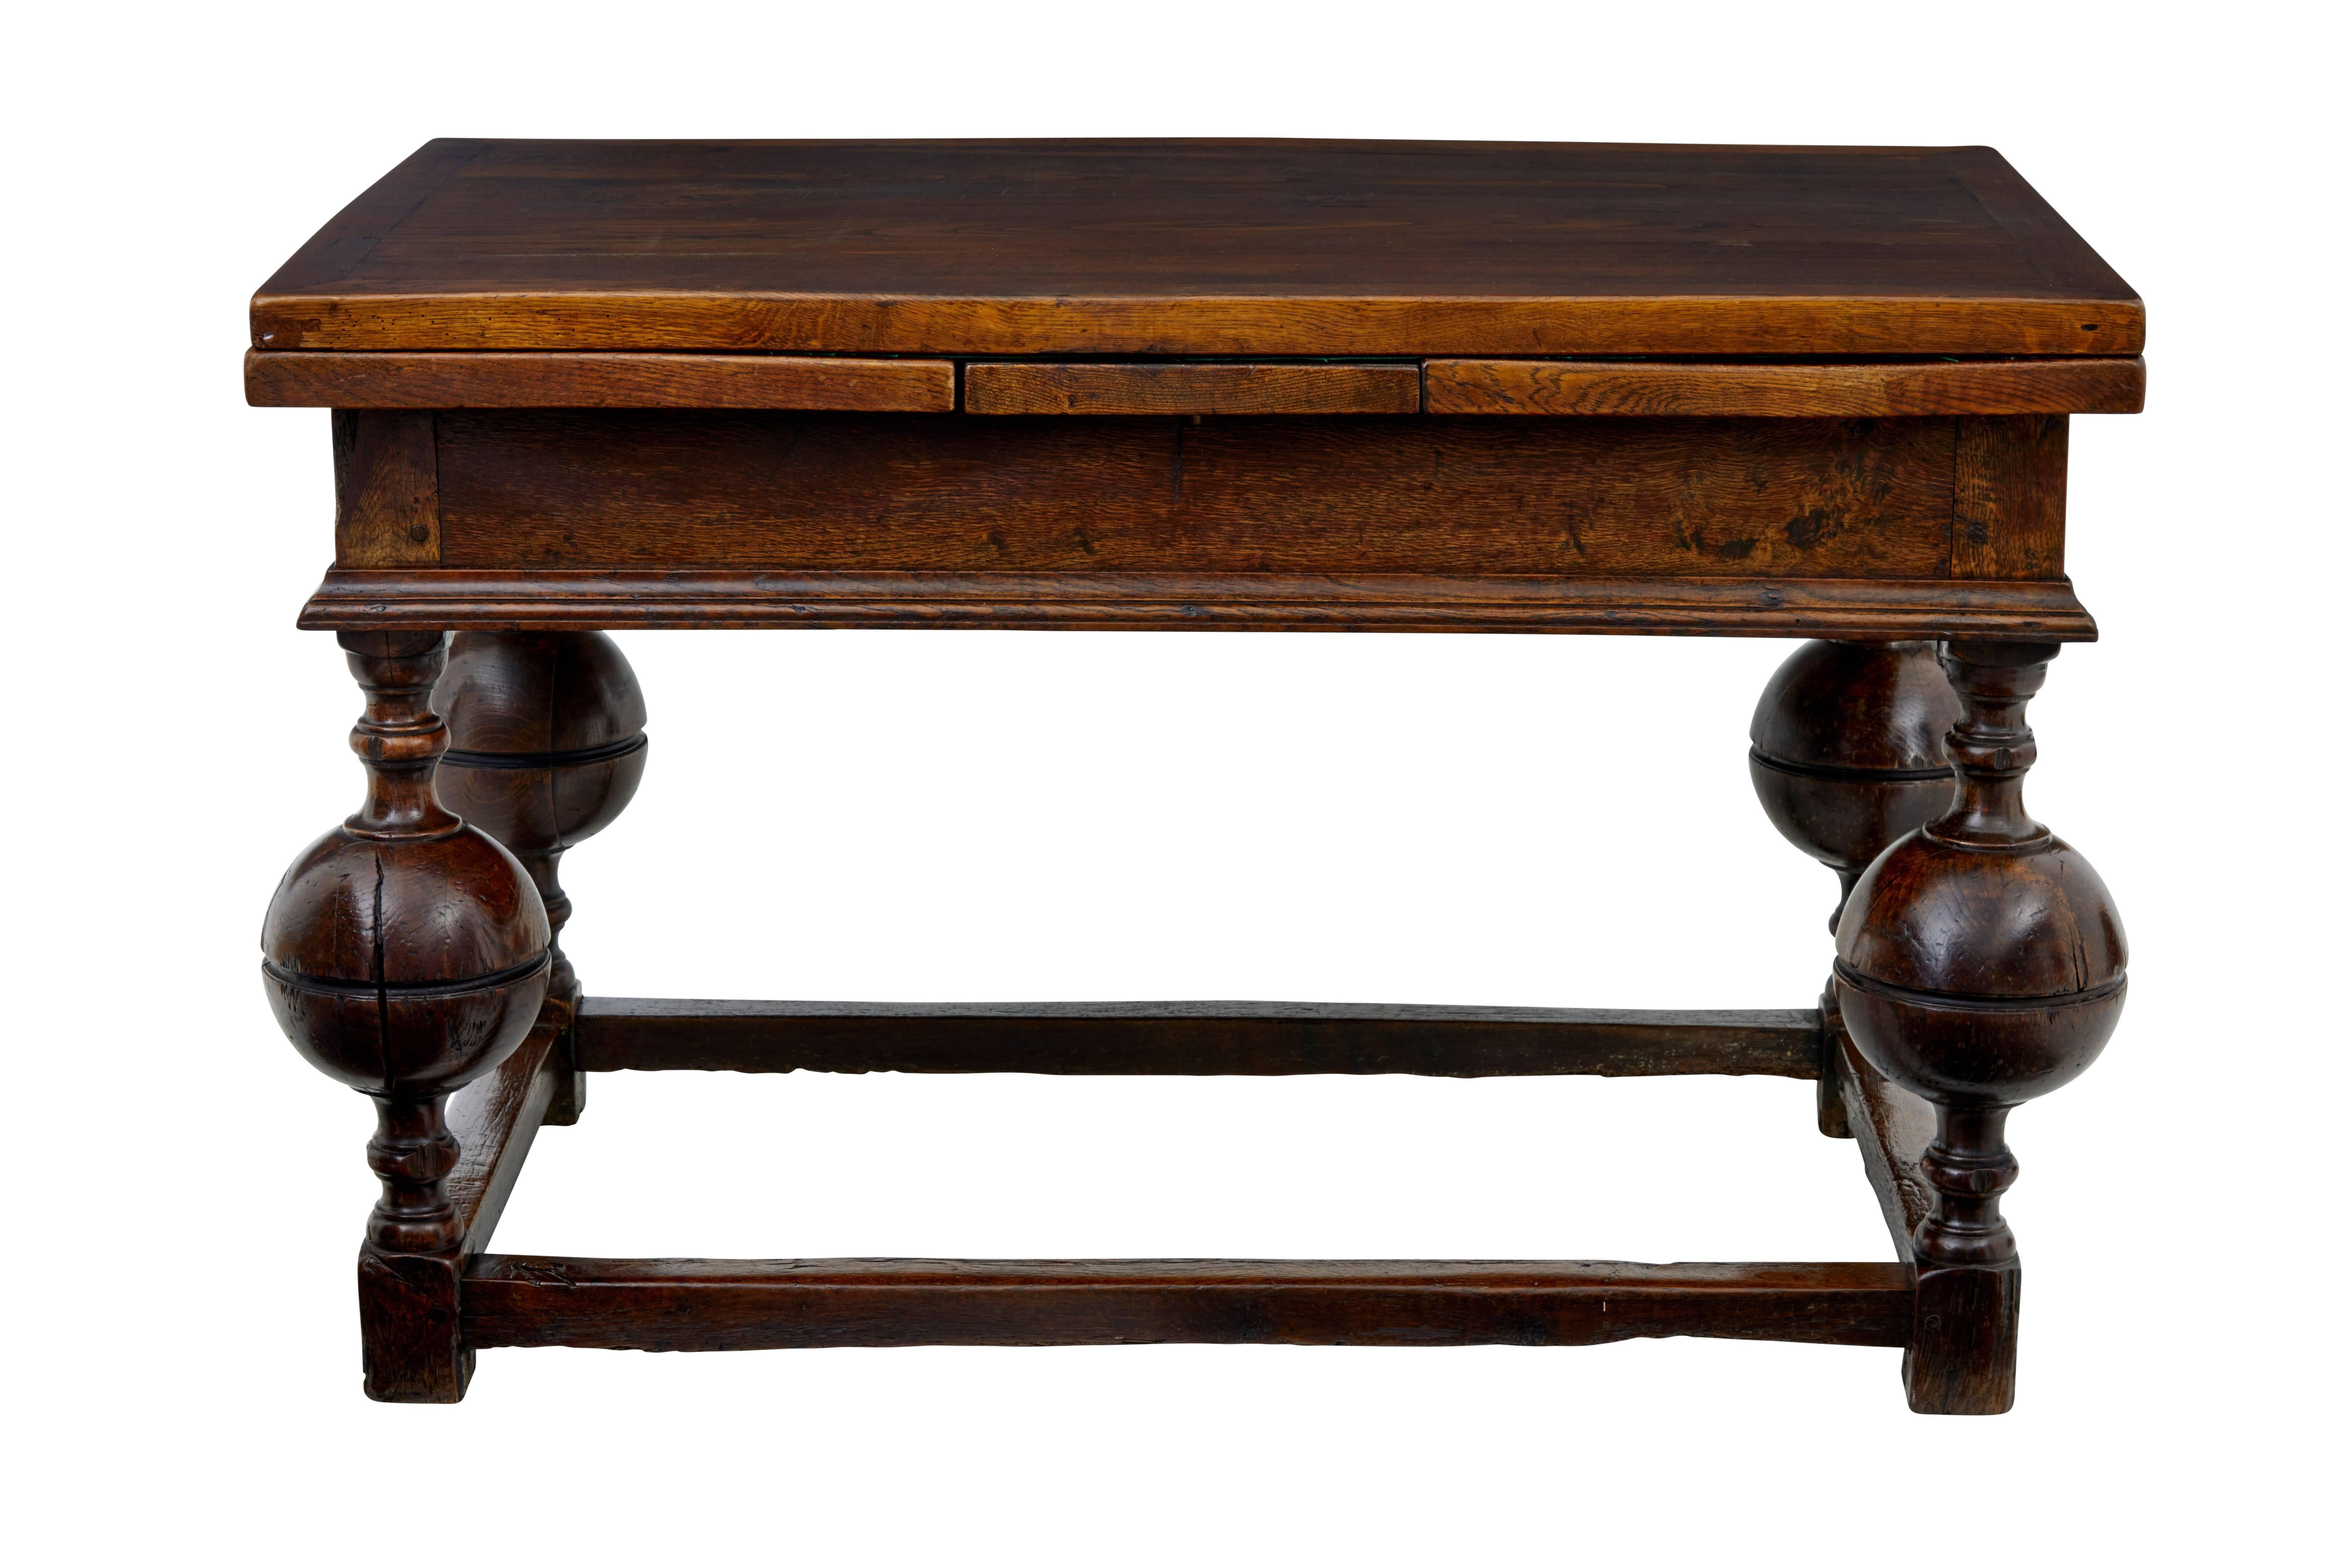 Beautiful early 19th century kitchen dining table, circa 1800.

Seats six and with the leaves pulled out there is room for a further four.
All solid oak and quite a heavy item.
Stands on four baluster sphere turned legs, united by